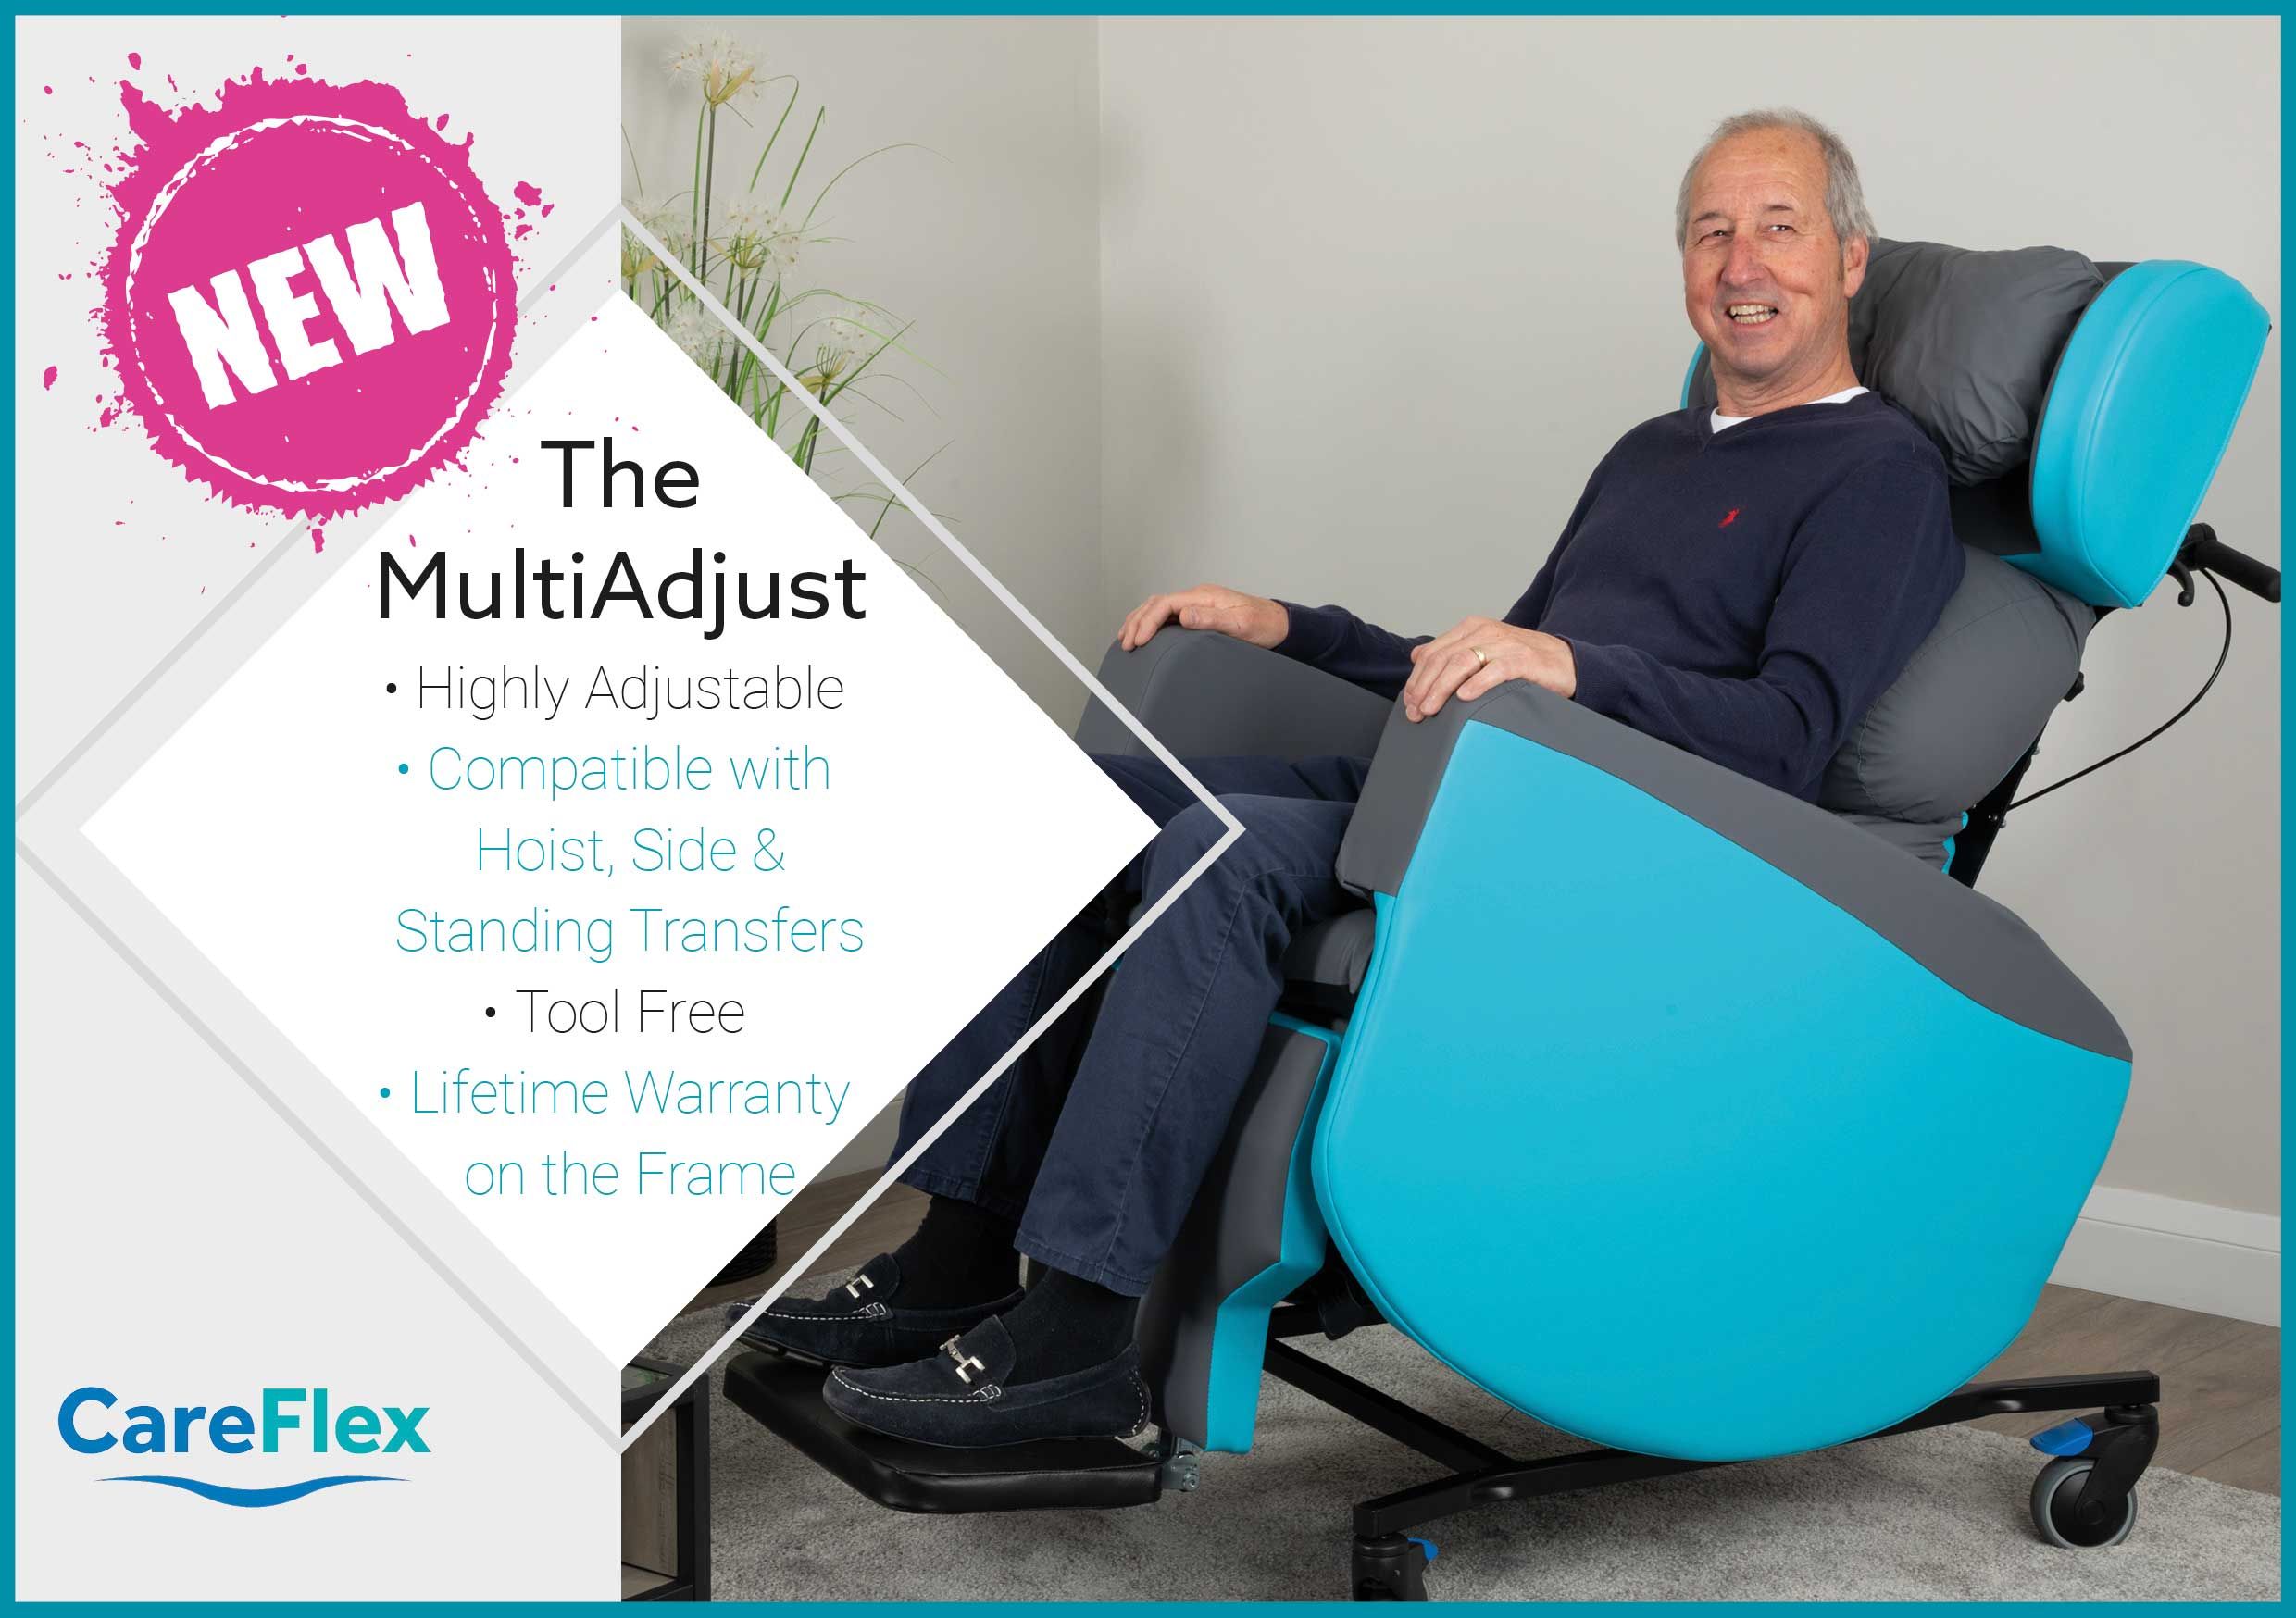 NEW MULTIADJUST CHAIR LAUNCH